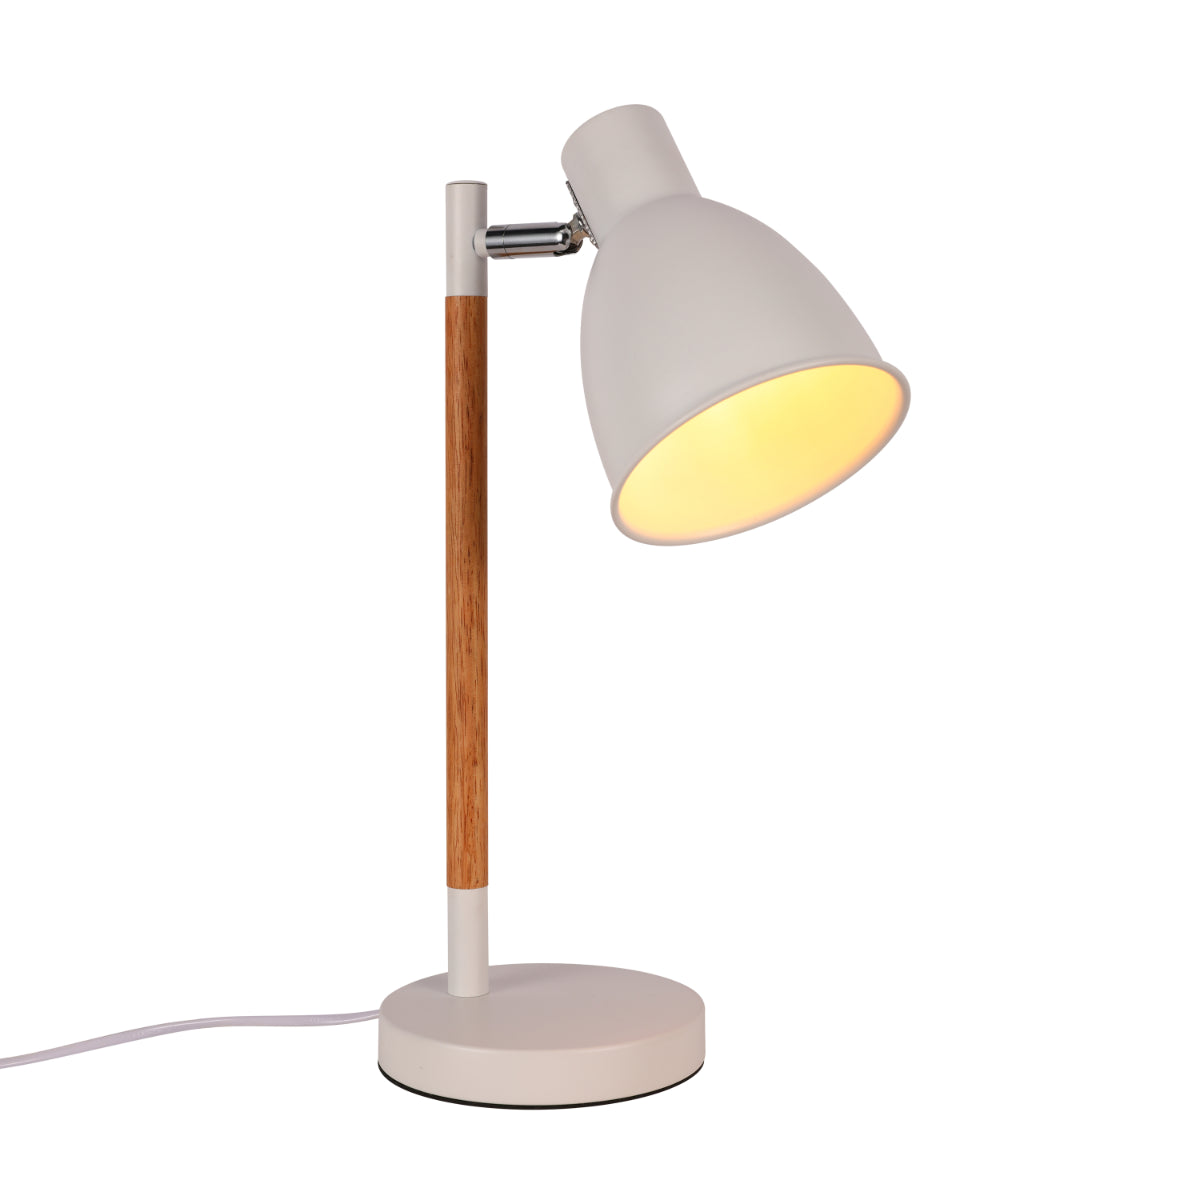 Main image of Nordic Elegance Desk Lamp with Dominant Wood Feature 130-03646